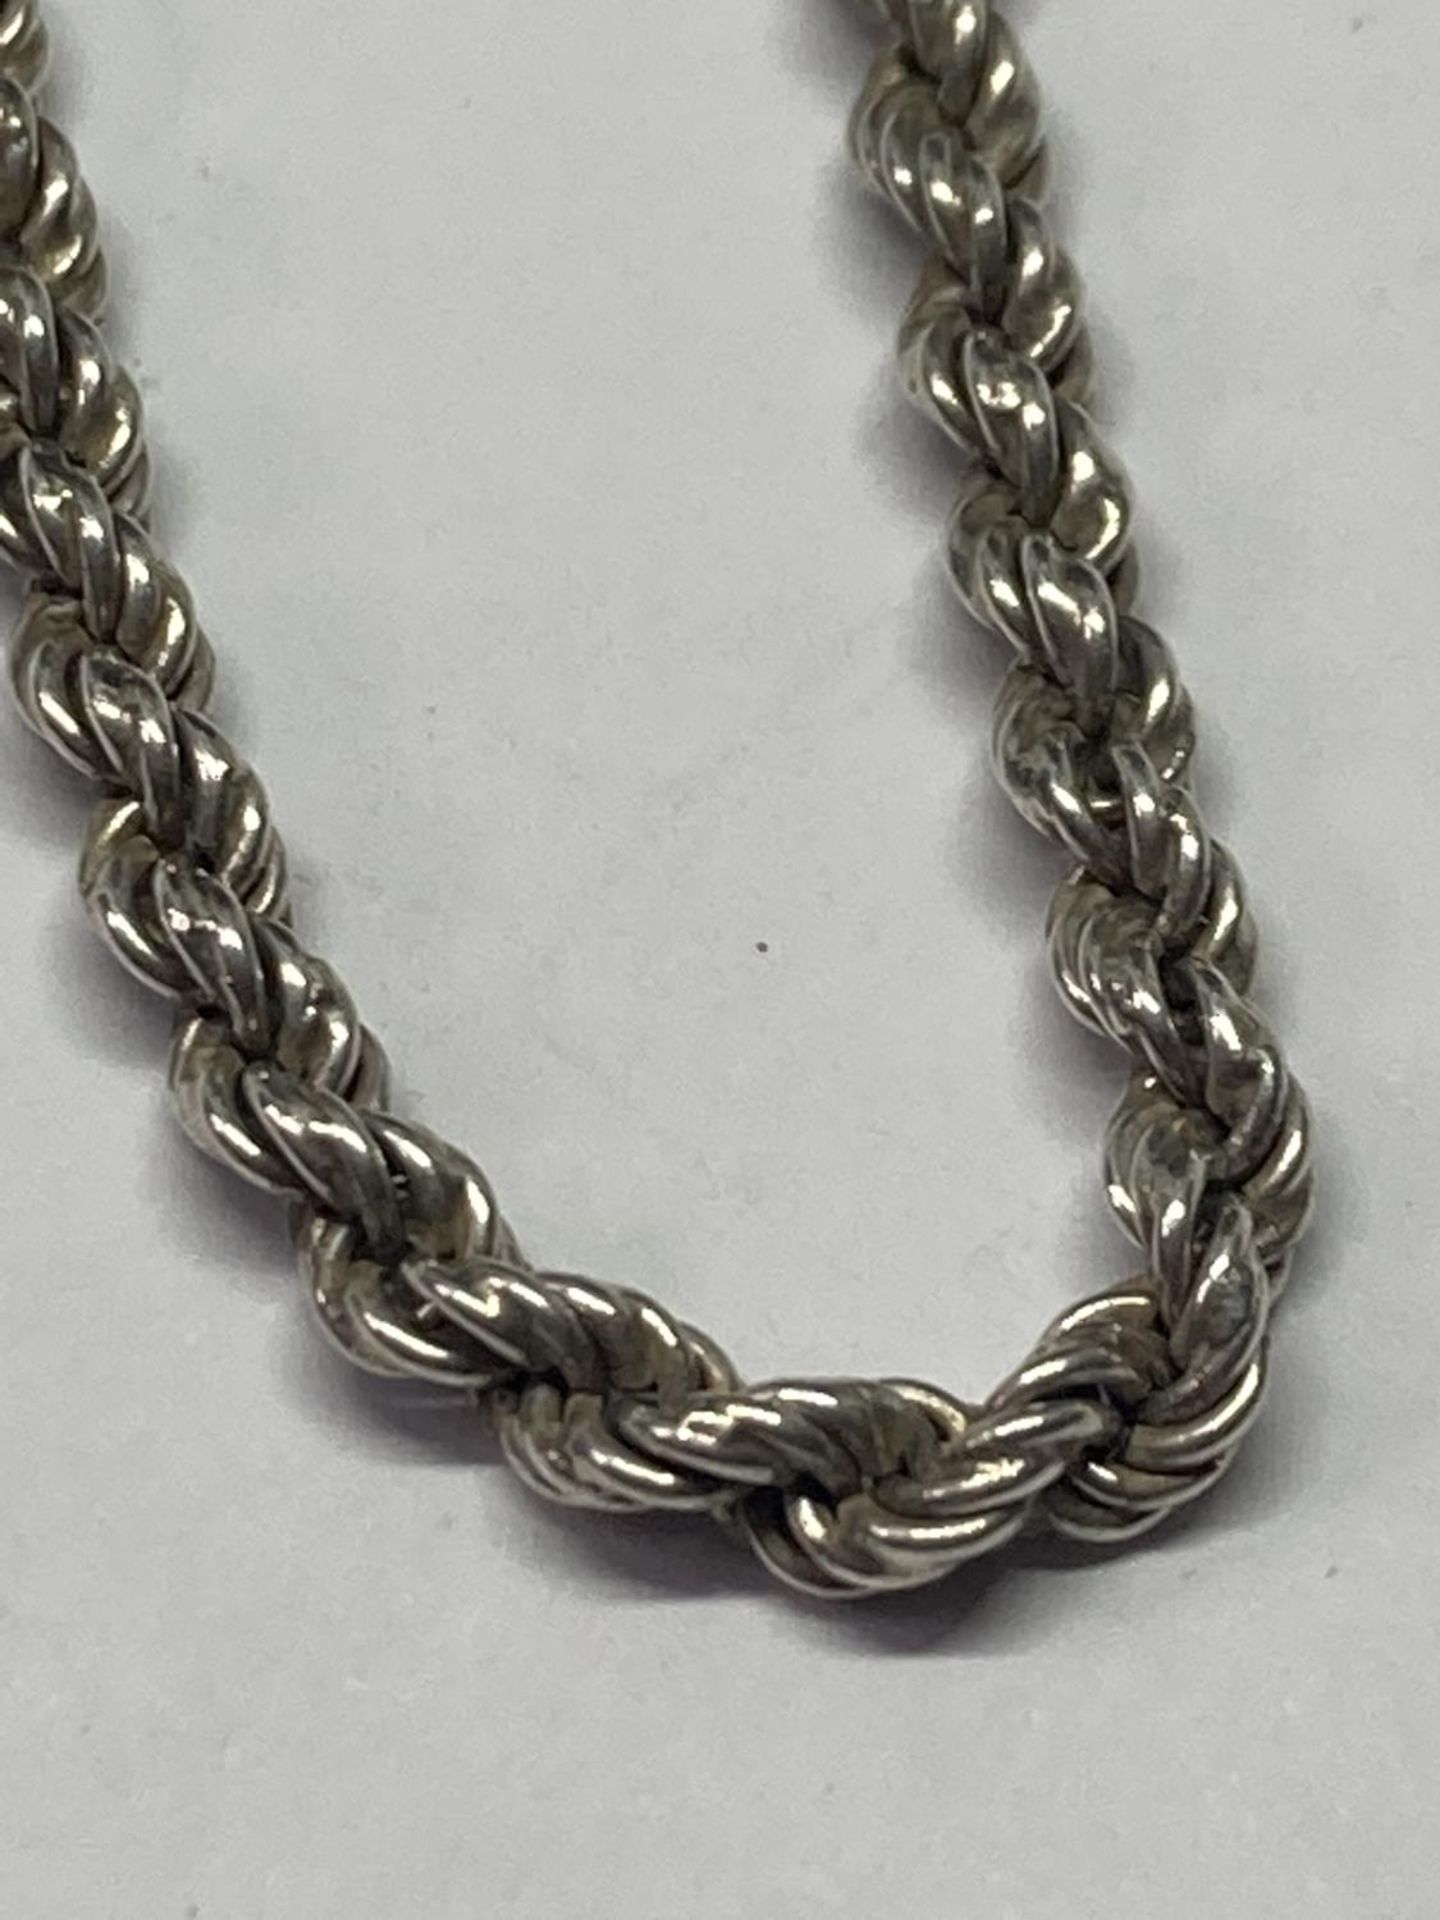 A SILVER ROPE NECKLACE LENGTH 16" - Image 2 of 2